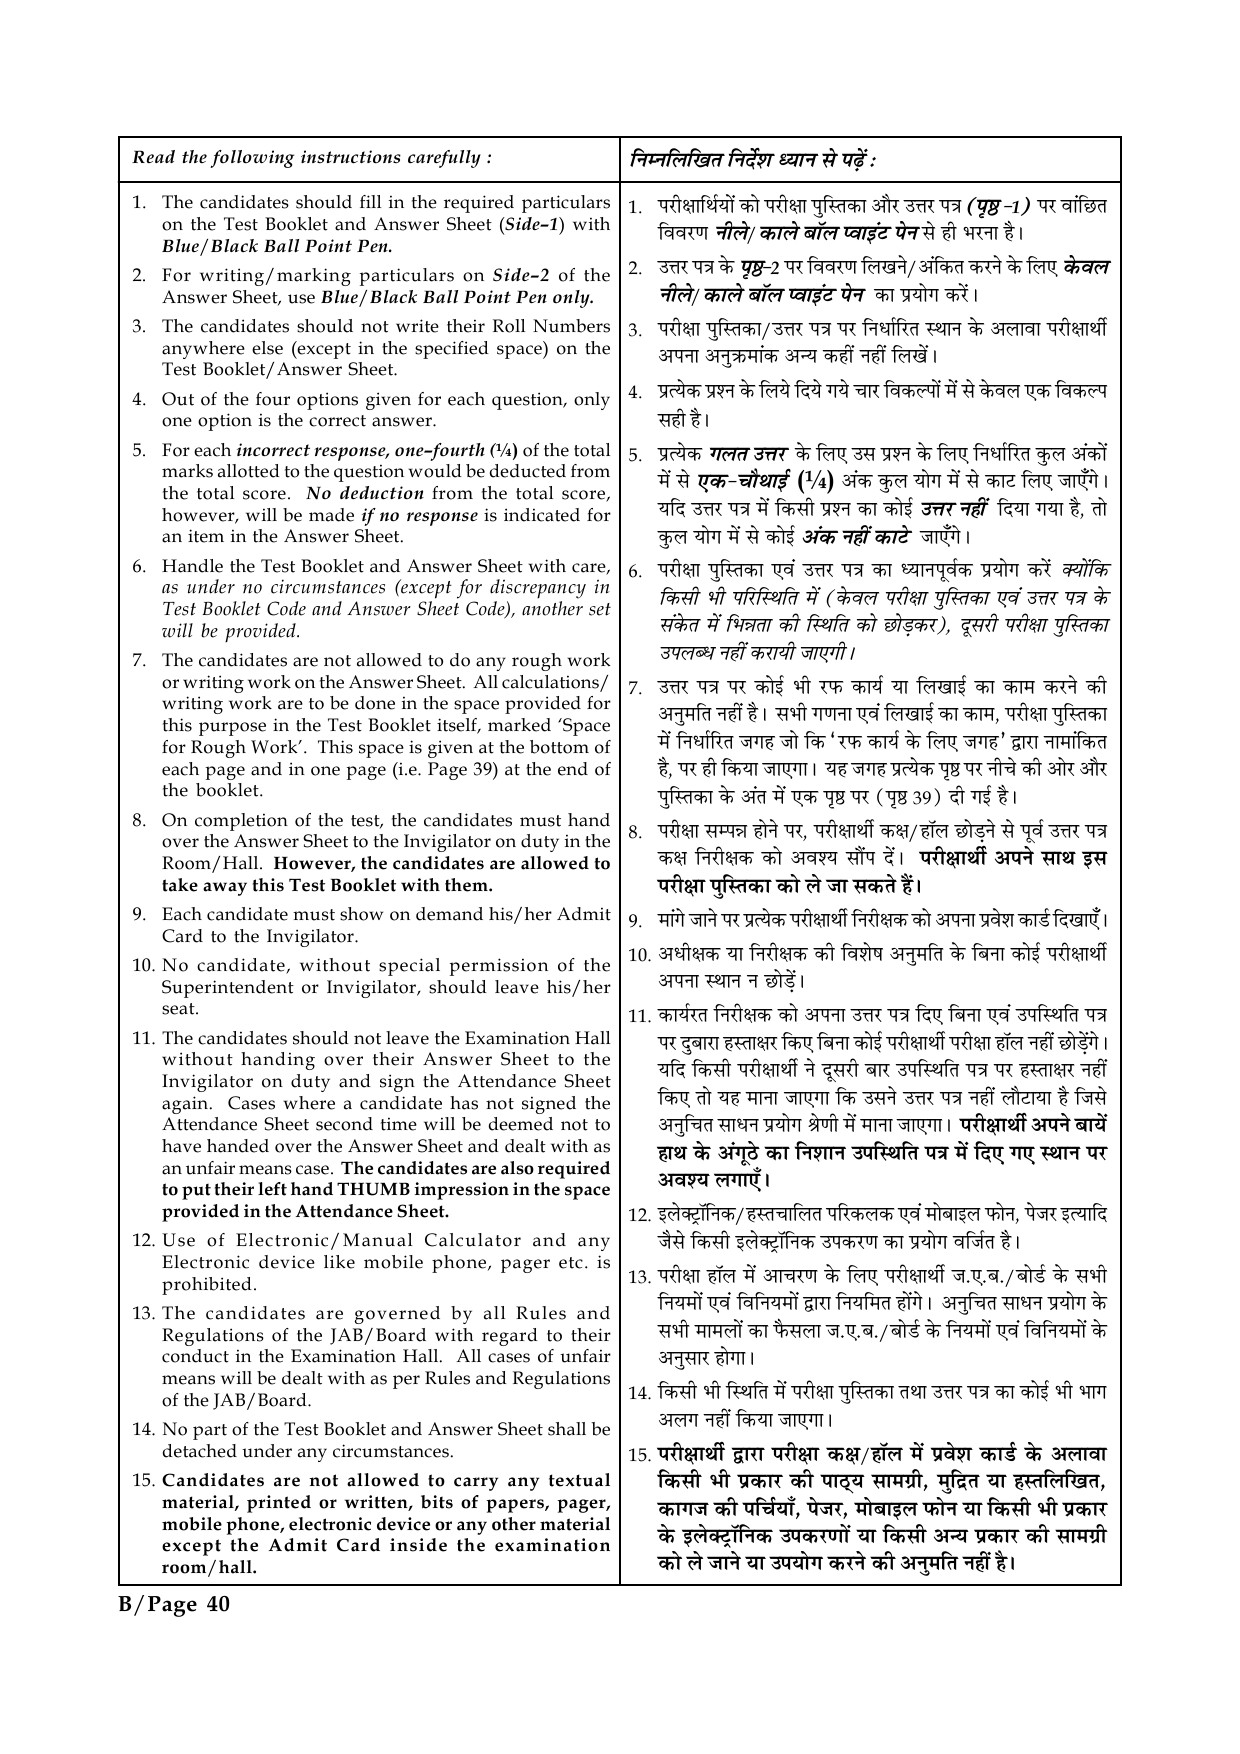 JEE Main Exam Question Paper 2015 Booklet B 39